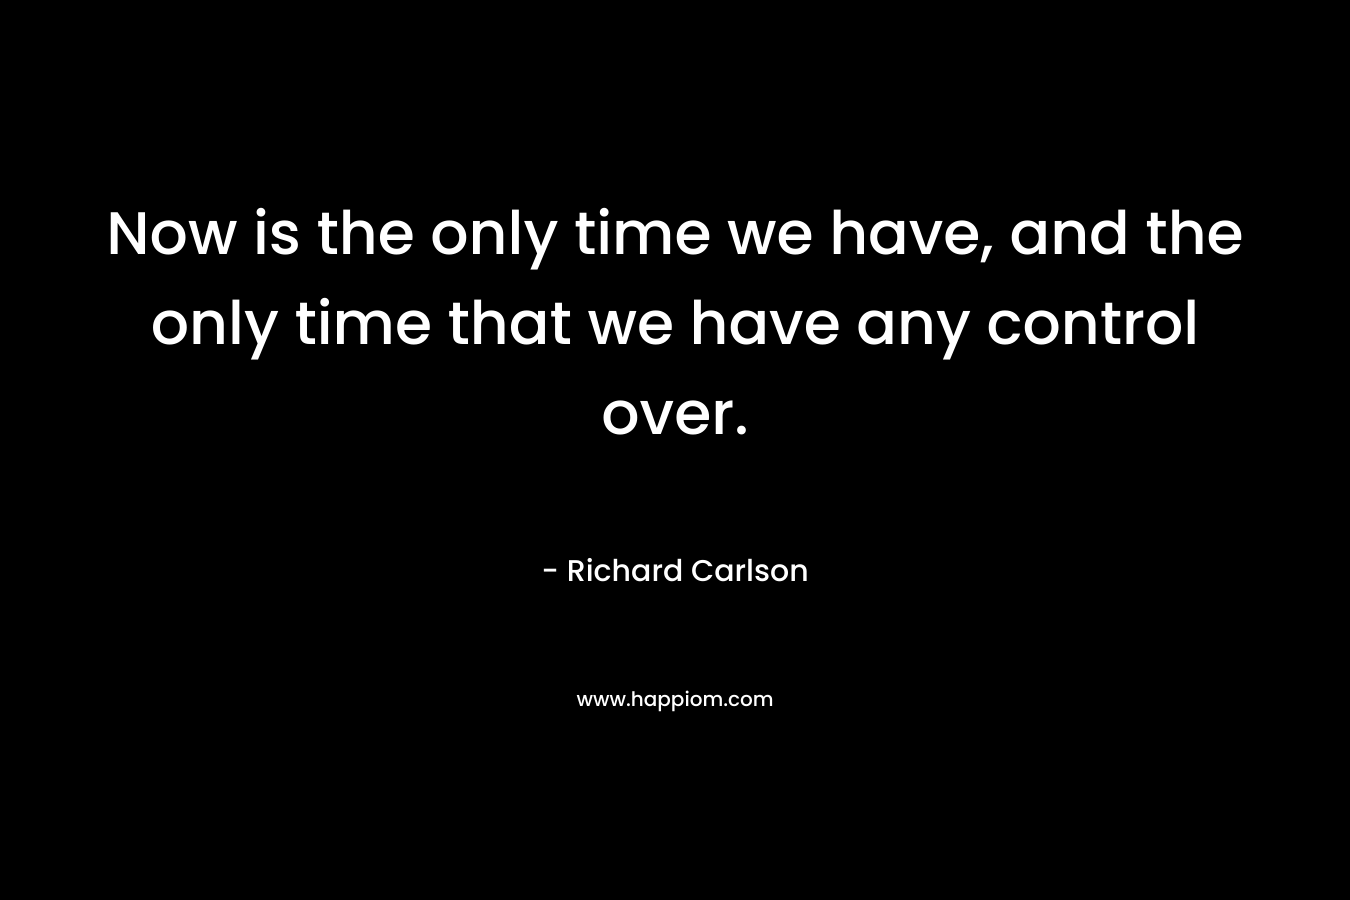 Now is the only time we have, and the only time that we have any control over. – Richard Carlson